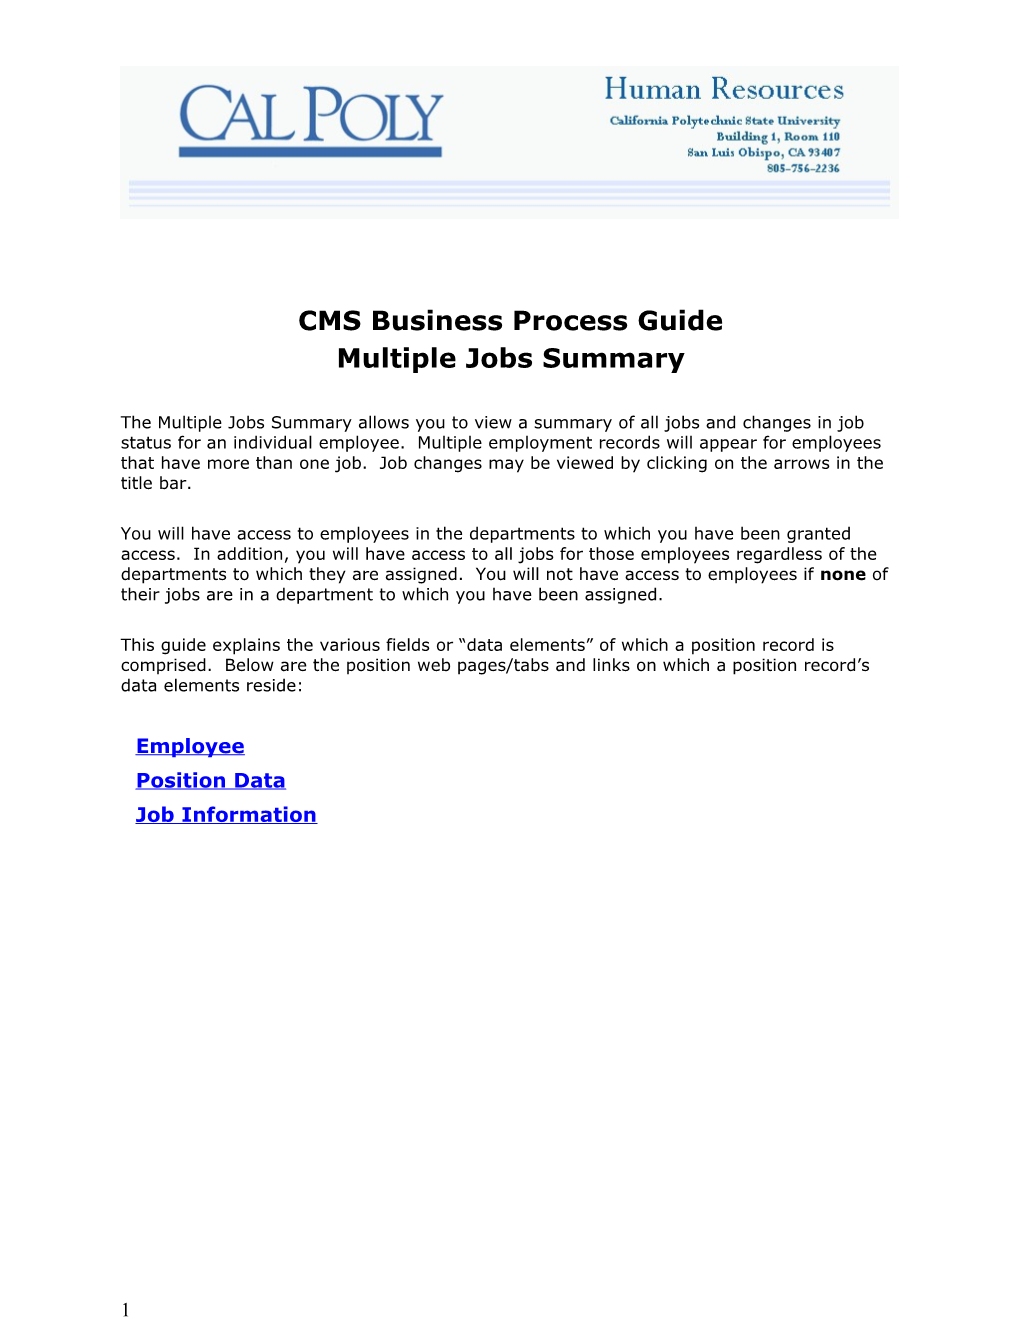 CMS Business Process Guide